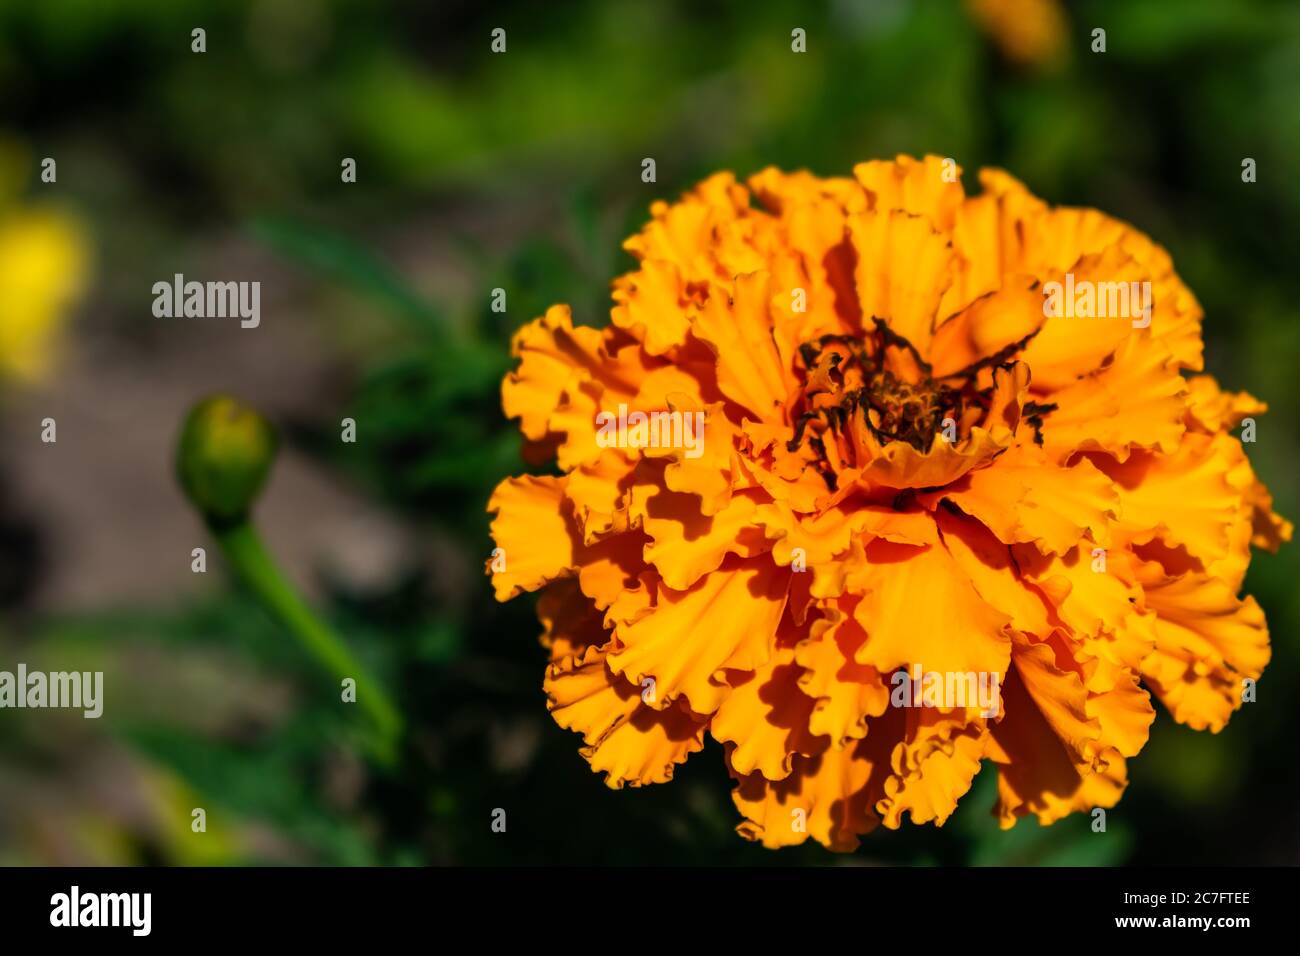 Orange Mexican marigold in a garden surrounded by flowers and bushes under sunlight Stock Photo